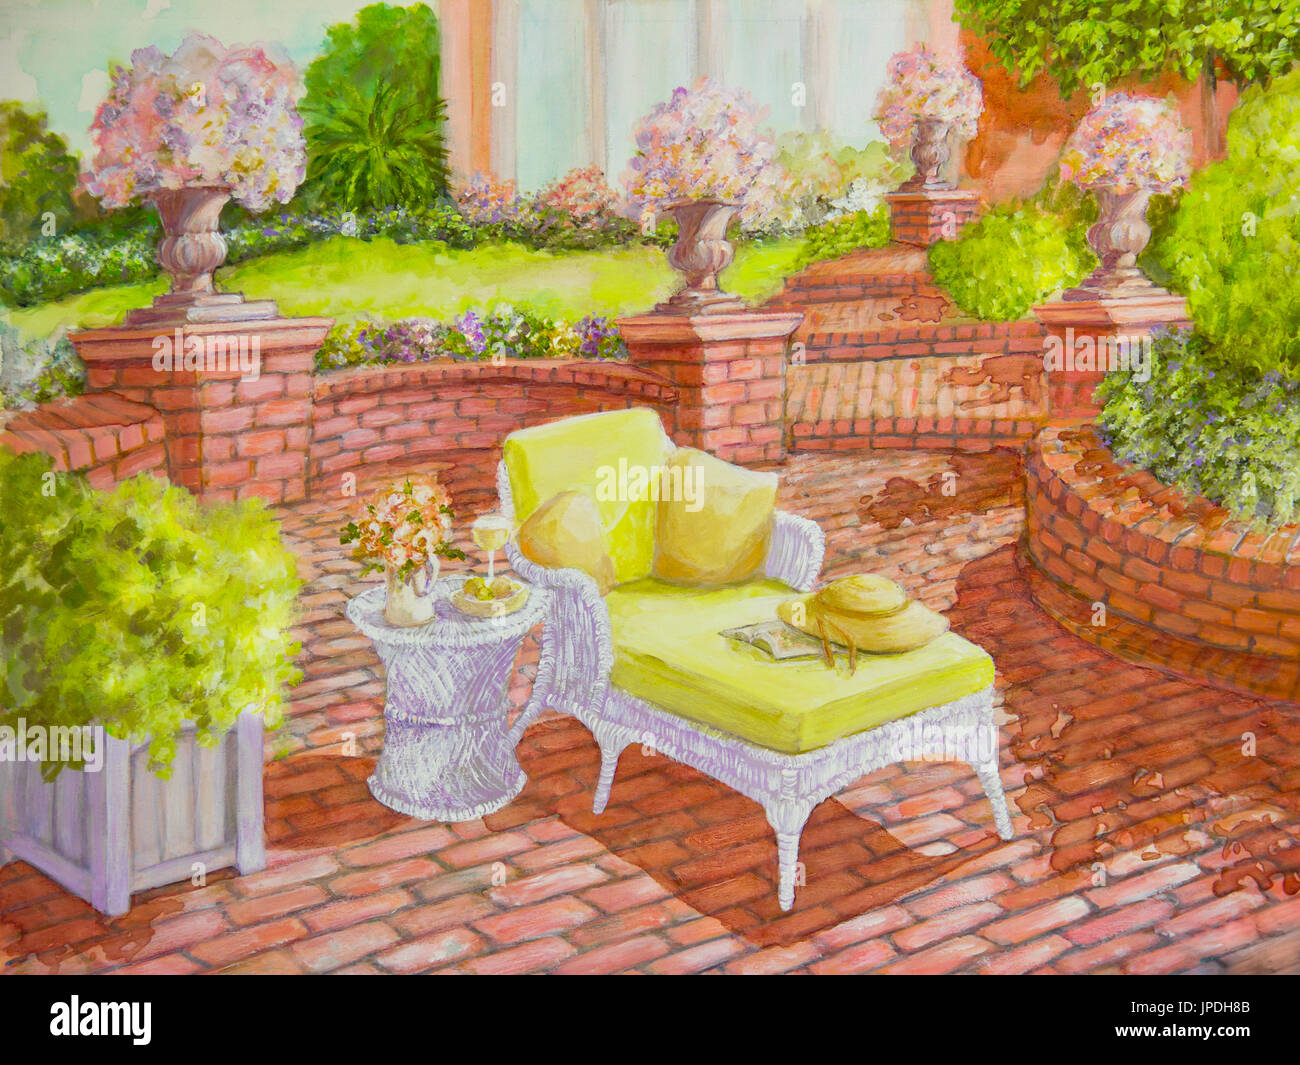 A white wicker lounge chair, holding a straw hat and a book, is on a brick patio in an acrylic painting. Stock Photo